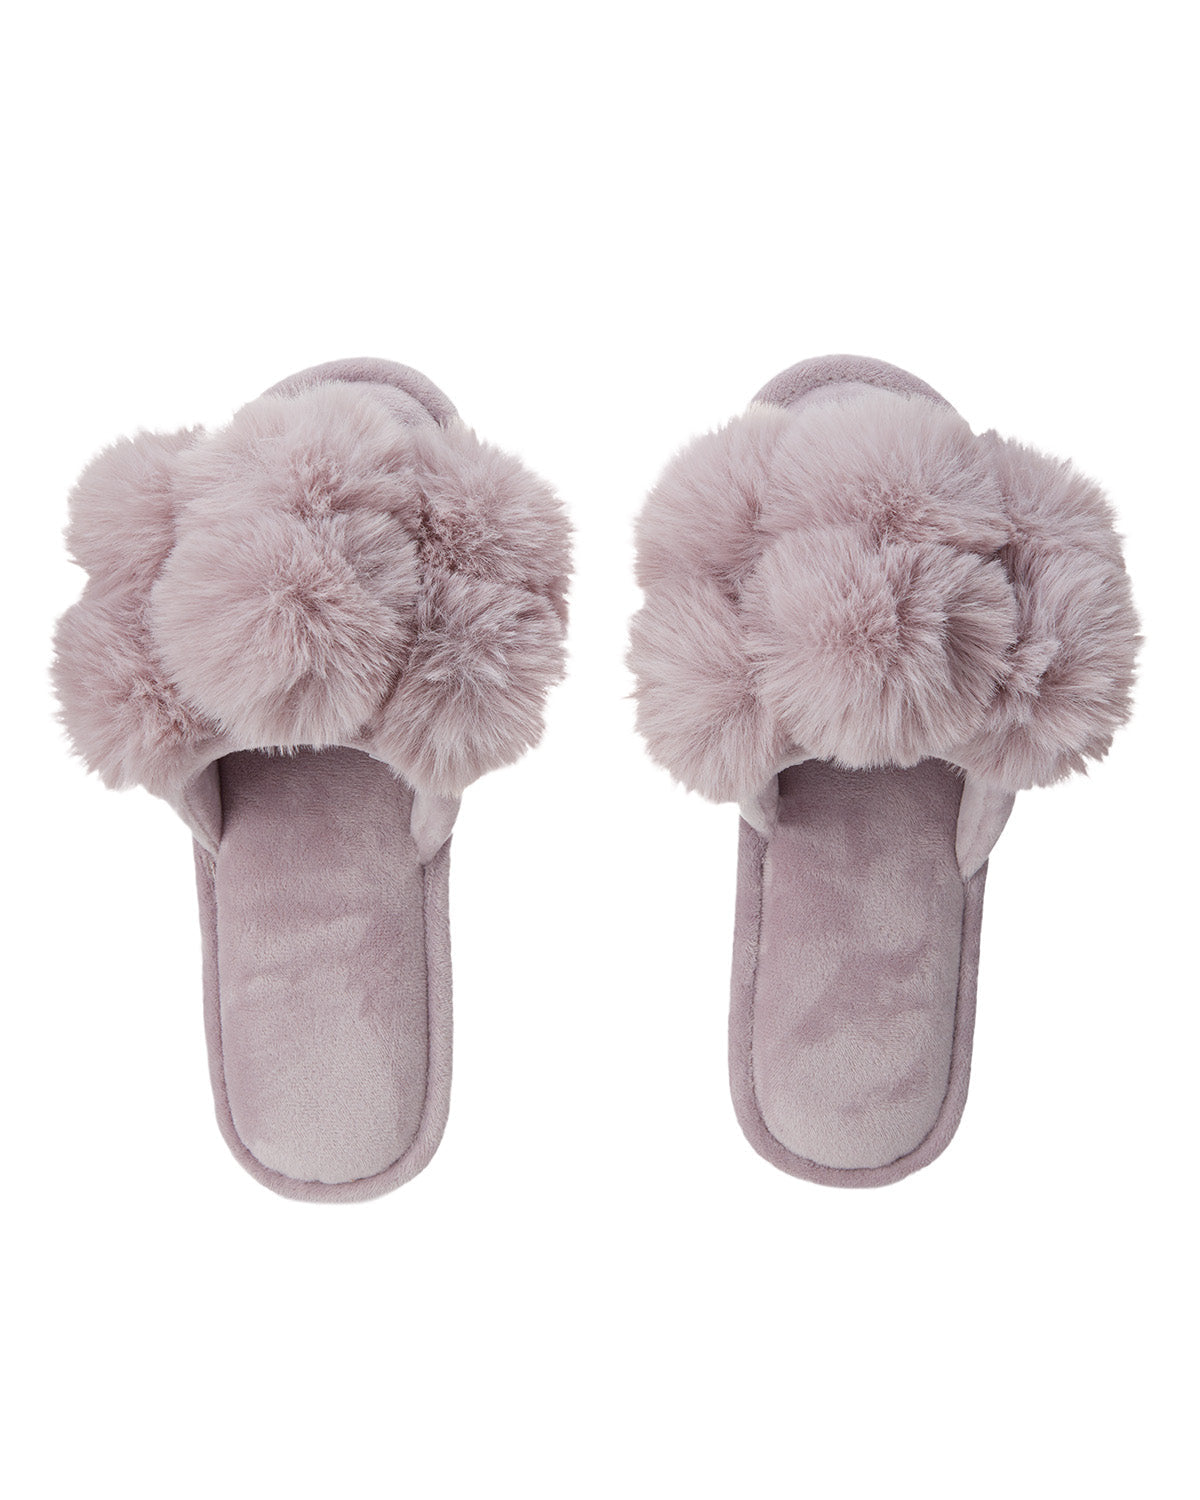 Luxe PomPom Slippers | Lavender